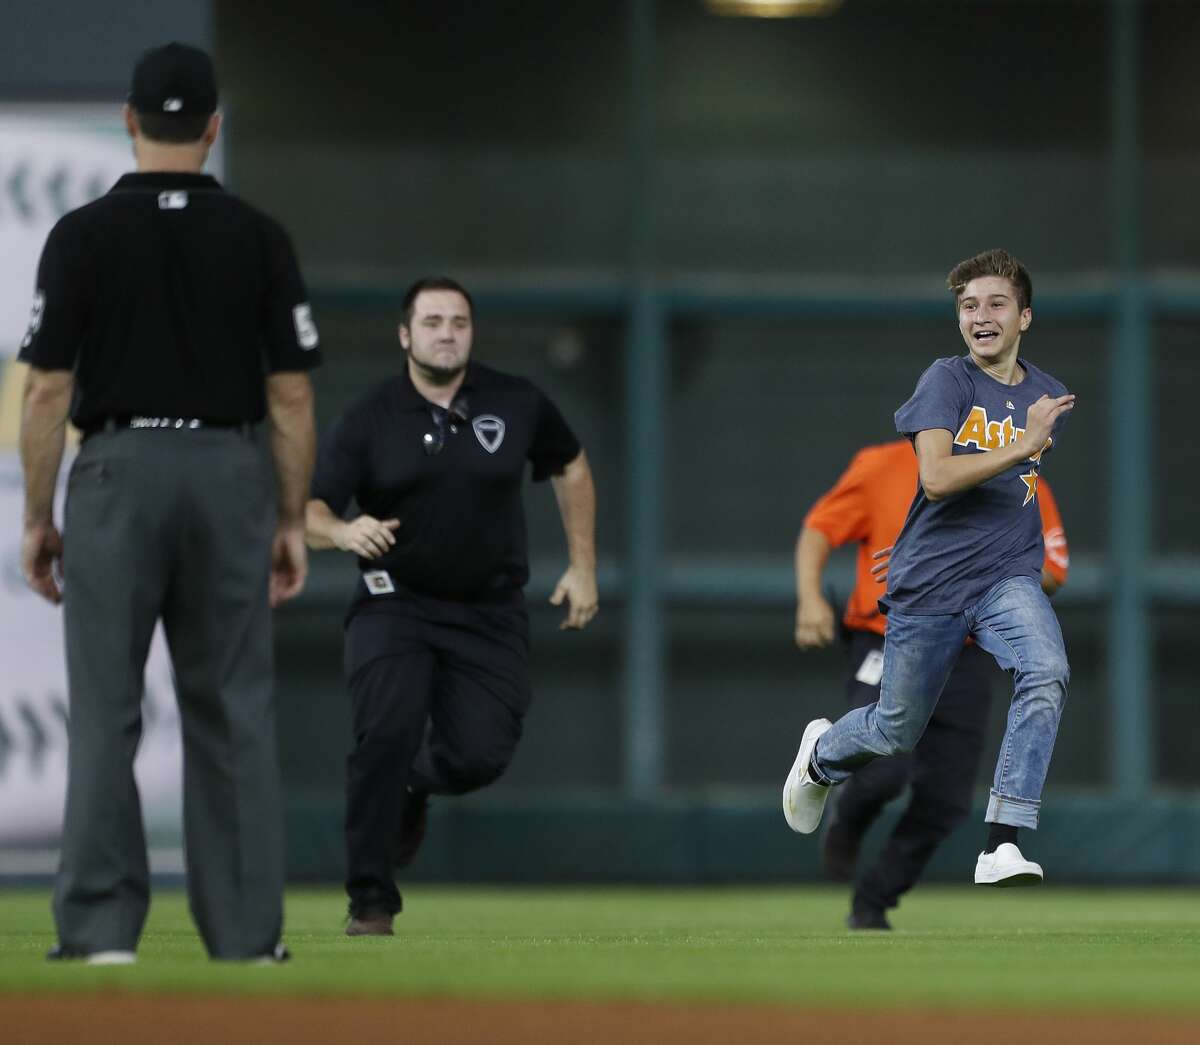 PHOTOS: A look at the fan eluding security during the Astros game A kid runs around the field as security and police gave chase during the seventh inning of an MLB baseball game at Minute Maid Park, Sunday, Sept. 24, 2017, in Houston. ( Karen Warren / Houston Chronicle )